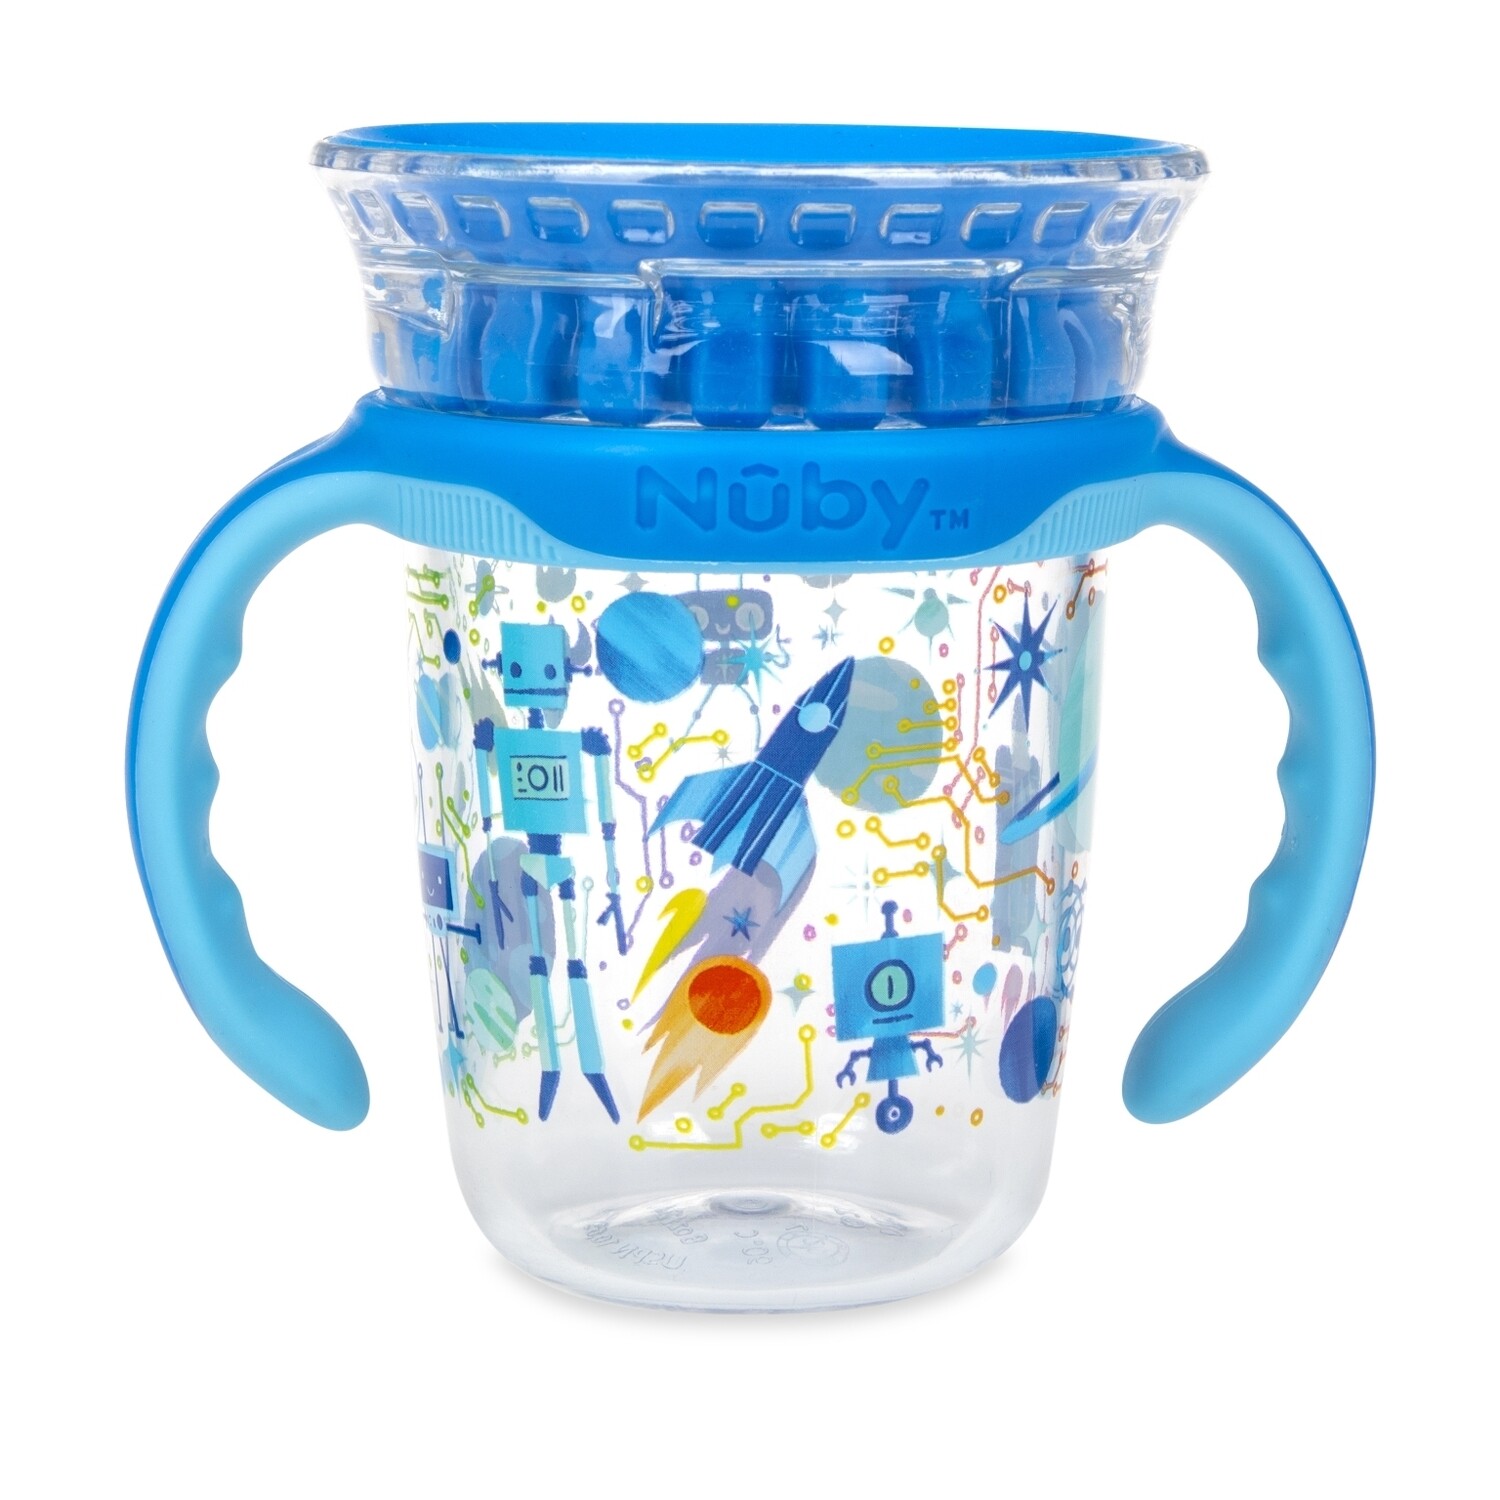 . Case of [48] Nuby 2 Stage Drinking Cups - 360 Edge Rim, Removable Handles, Robot, Blue .